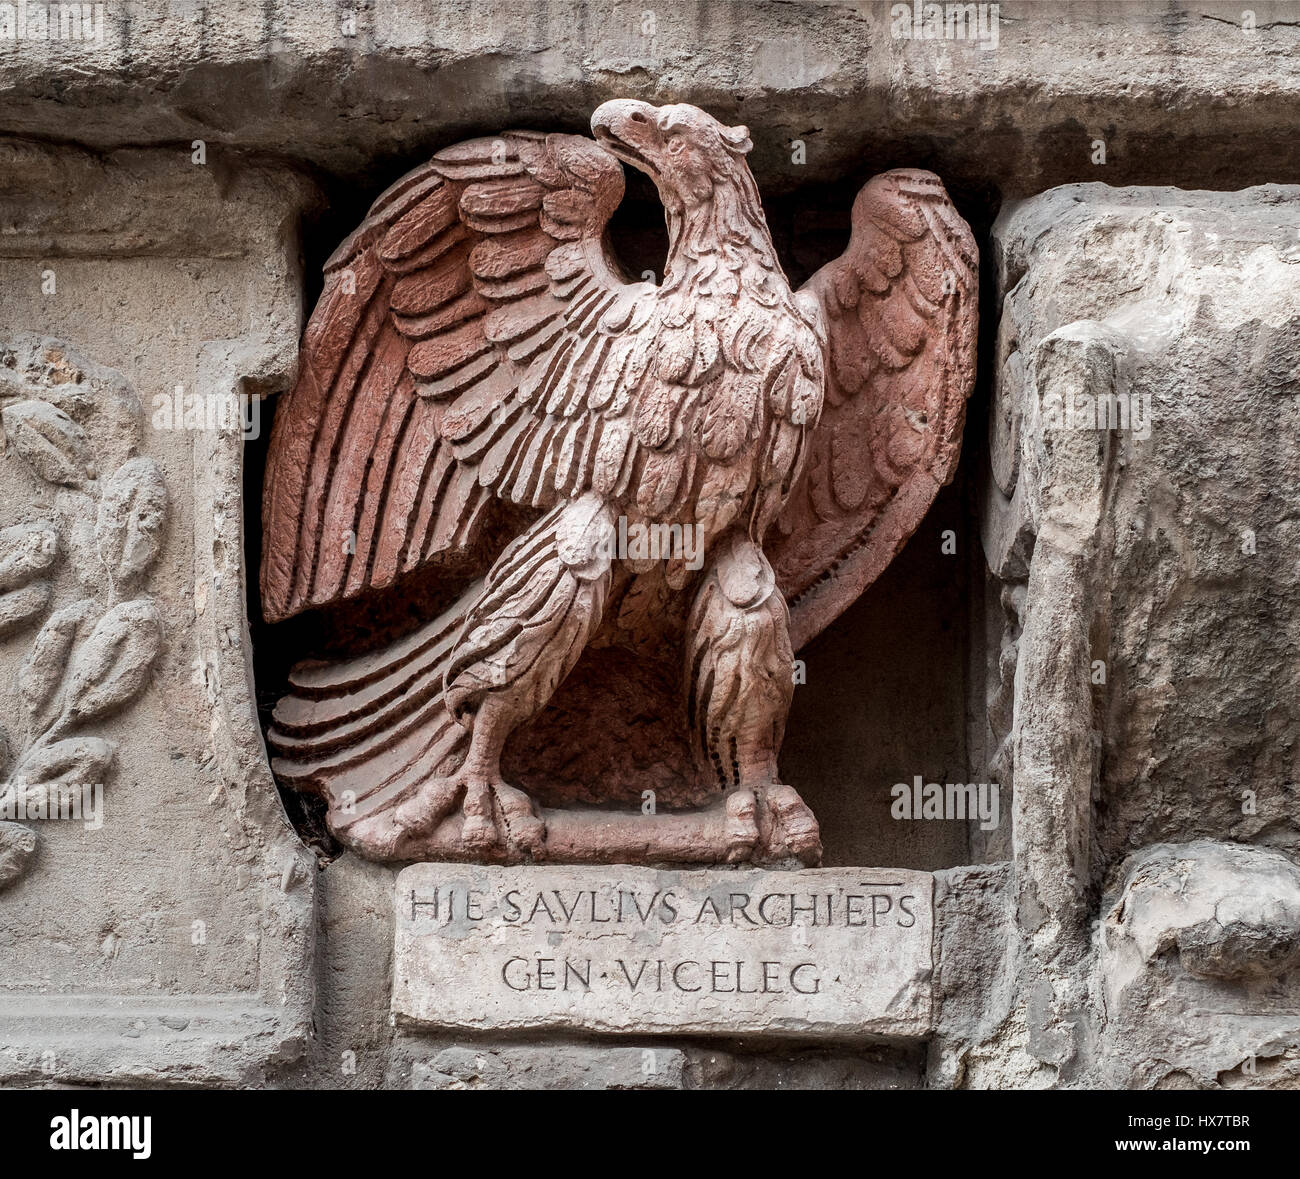 Renaissance's eagle sculpture, placed in the main square of Bologna City, Italy Stock Photo